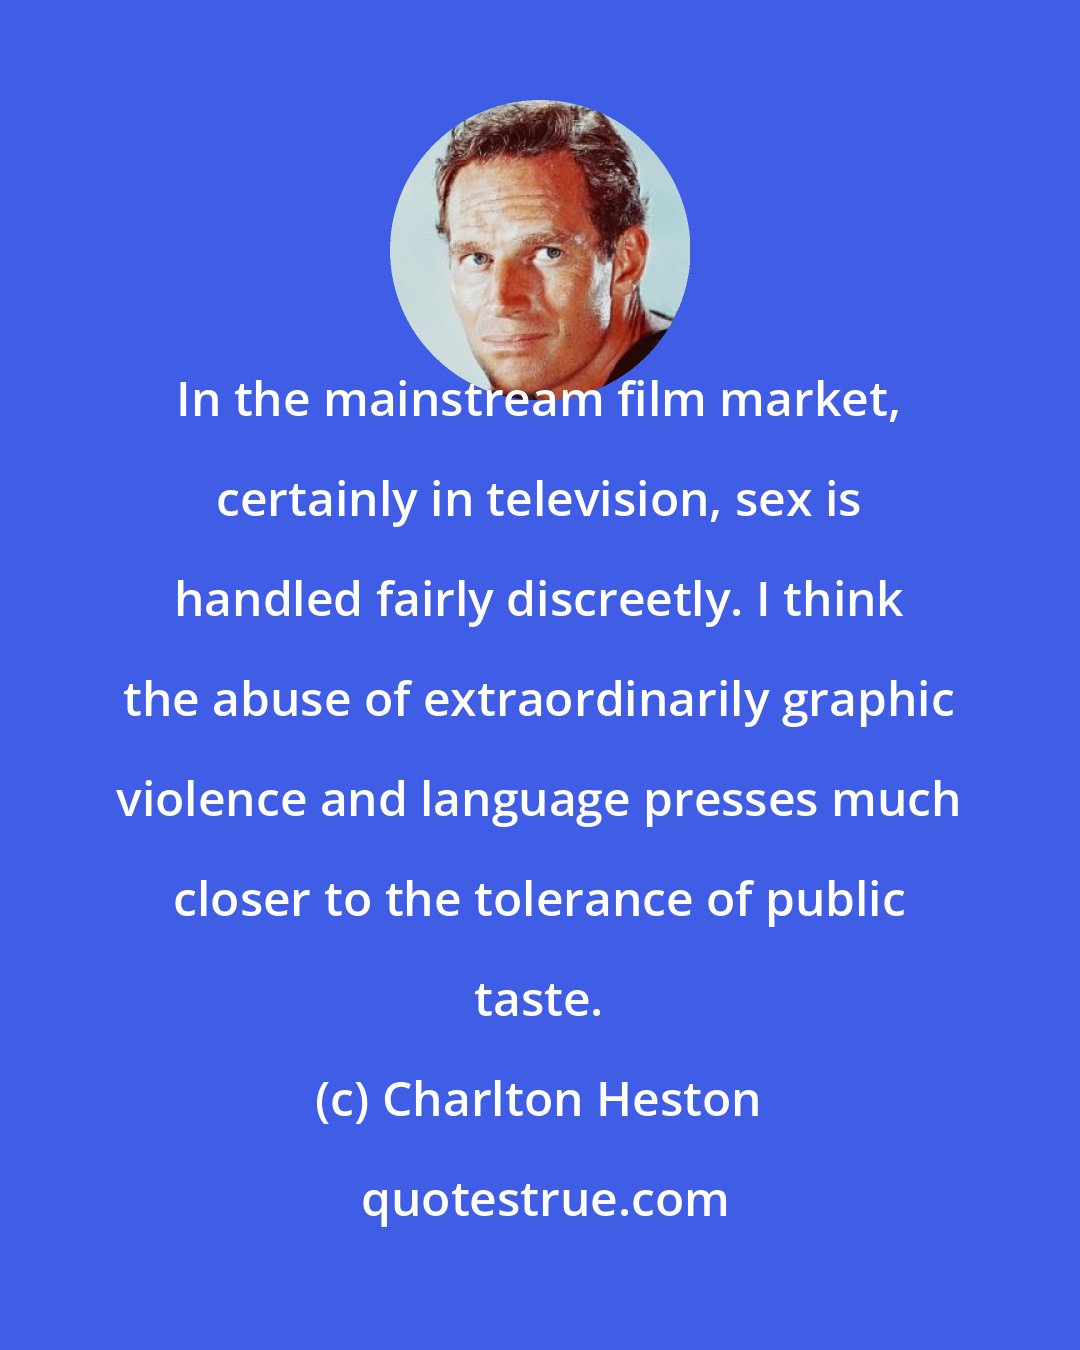 Charlton Heston: In the mainstream film market, certainly in television, sex is handled fairly discreetly. I think the abuse of extraordinarily graphic violence and language presses much closer to the tolerance of public taste.